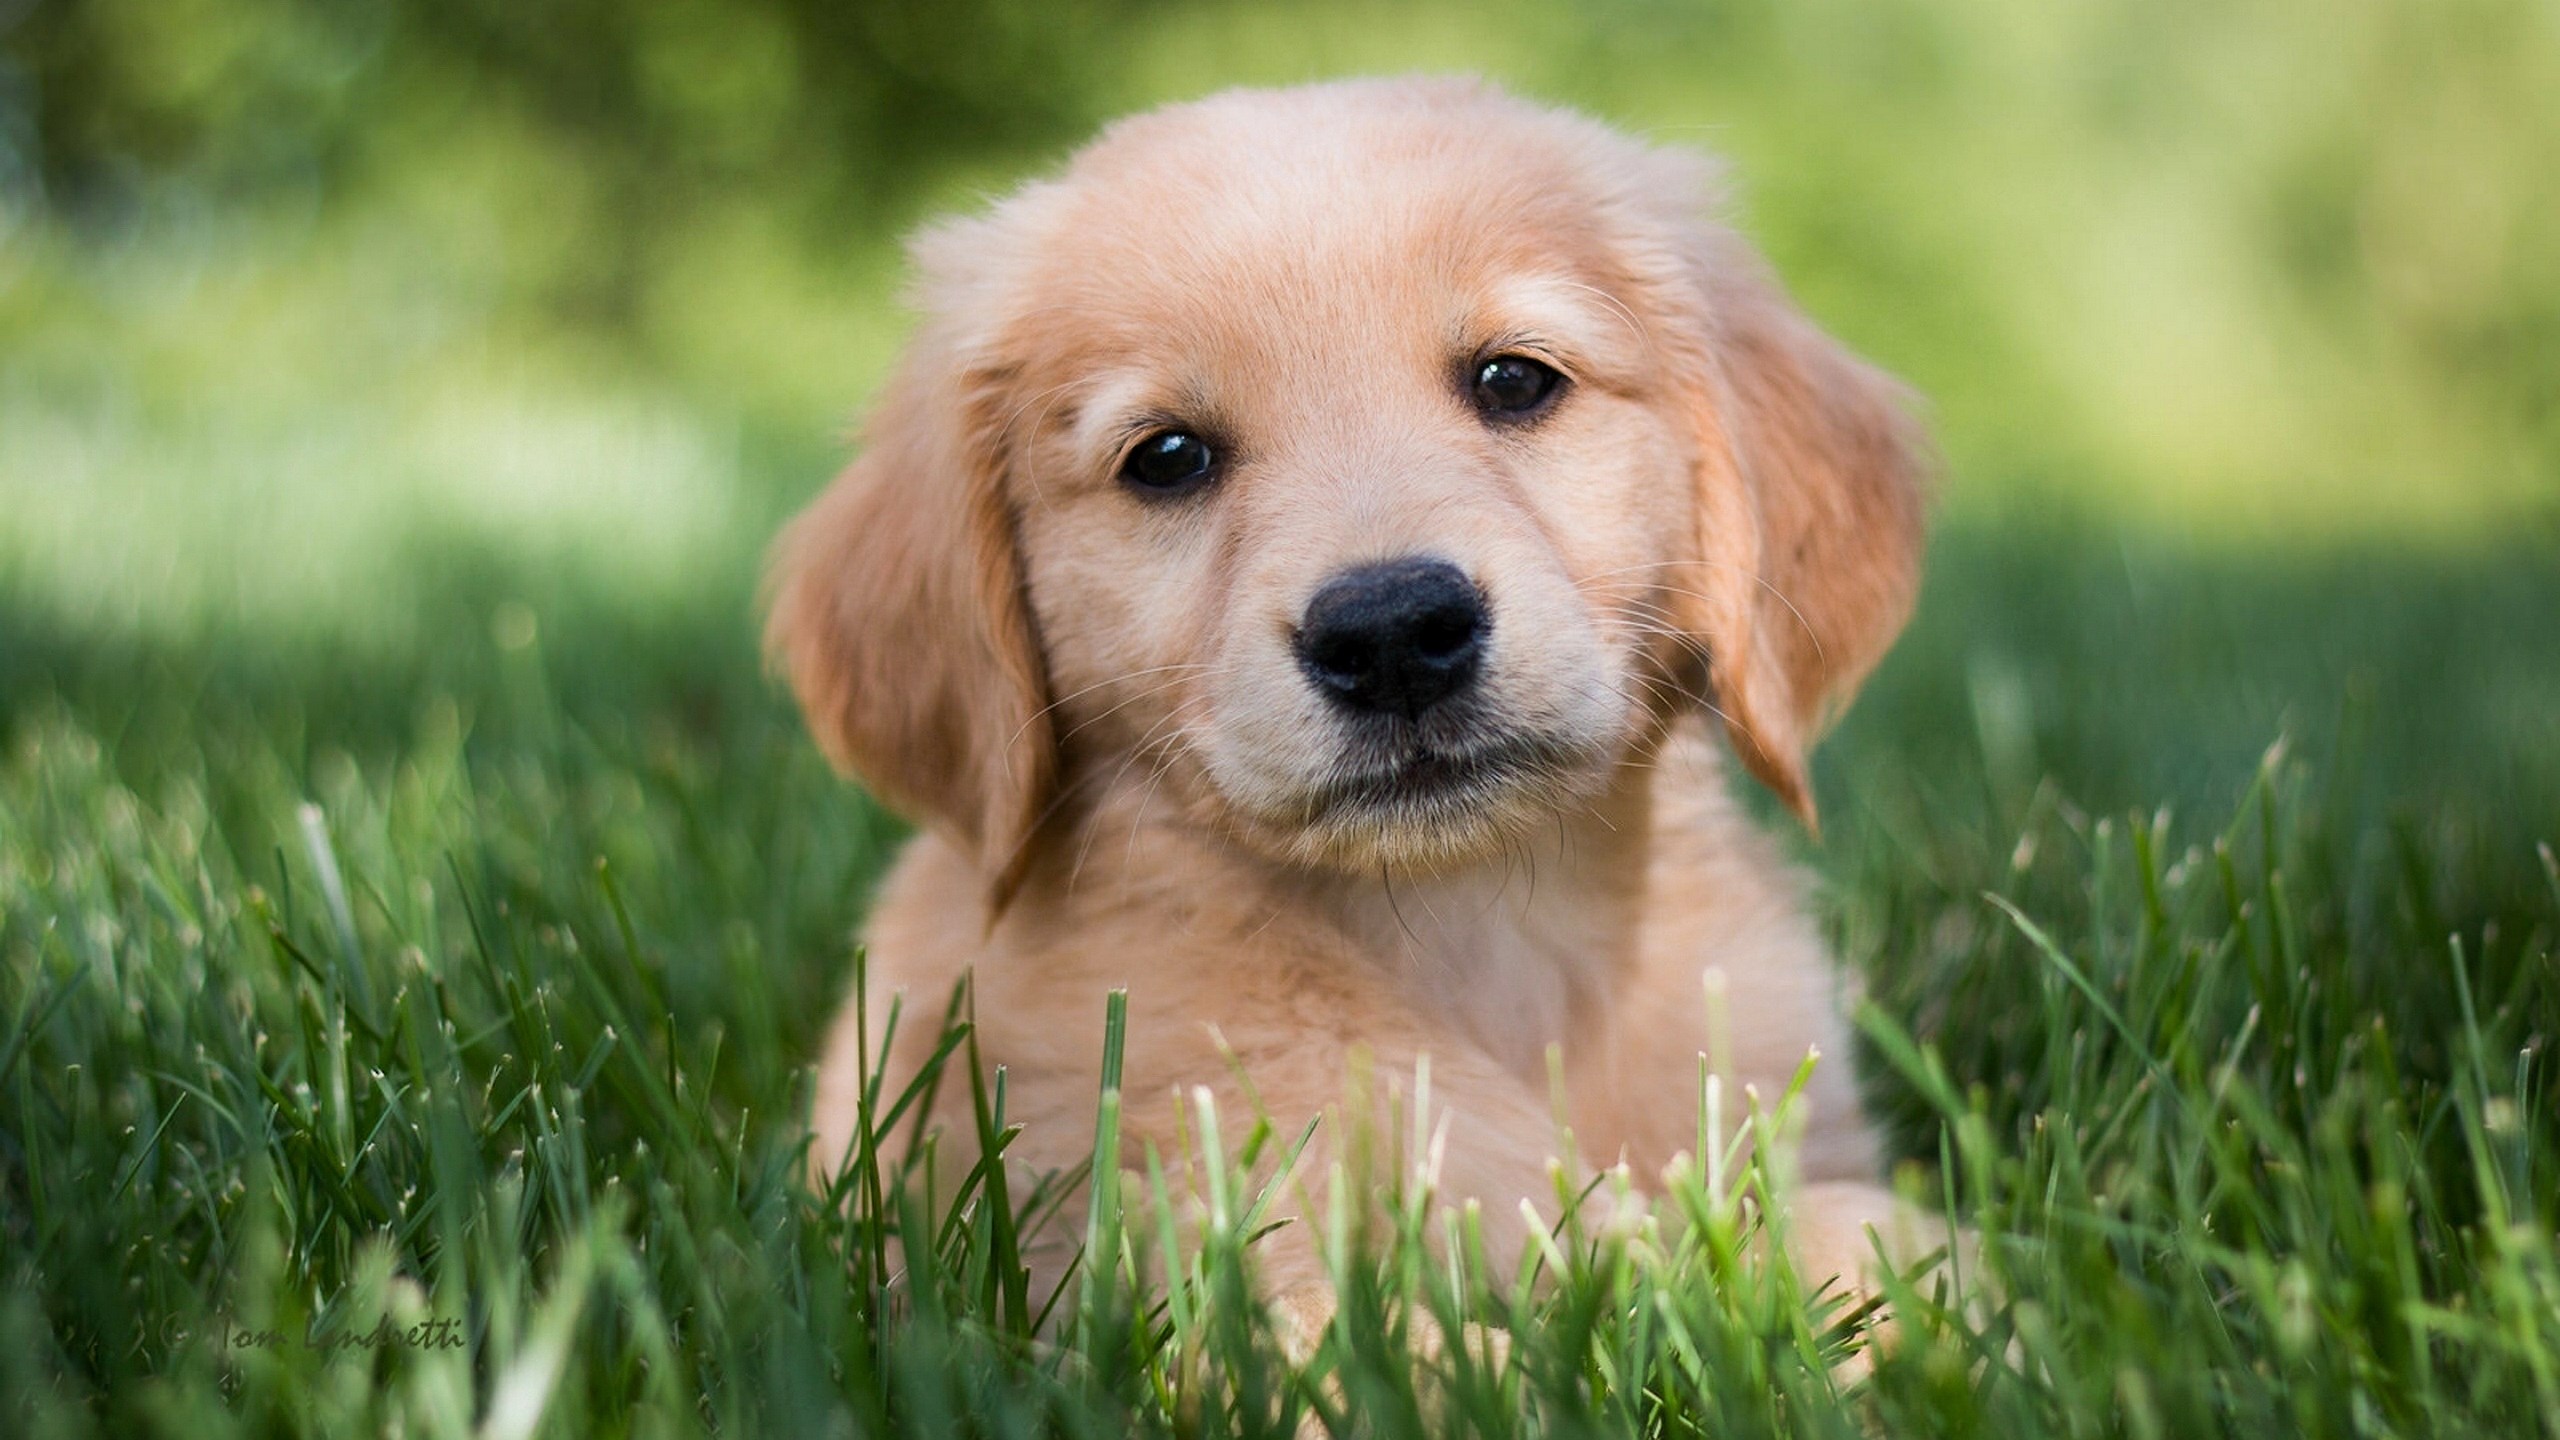 33+ Golden Retriever Images Free Download Photo - Codepromos